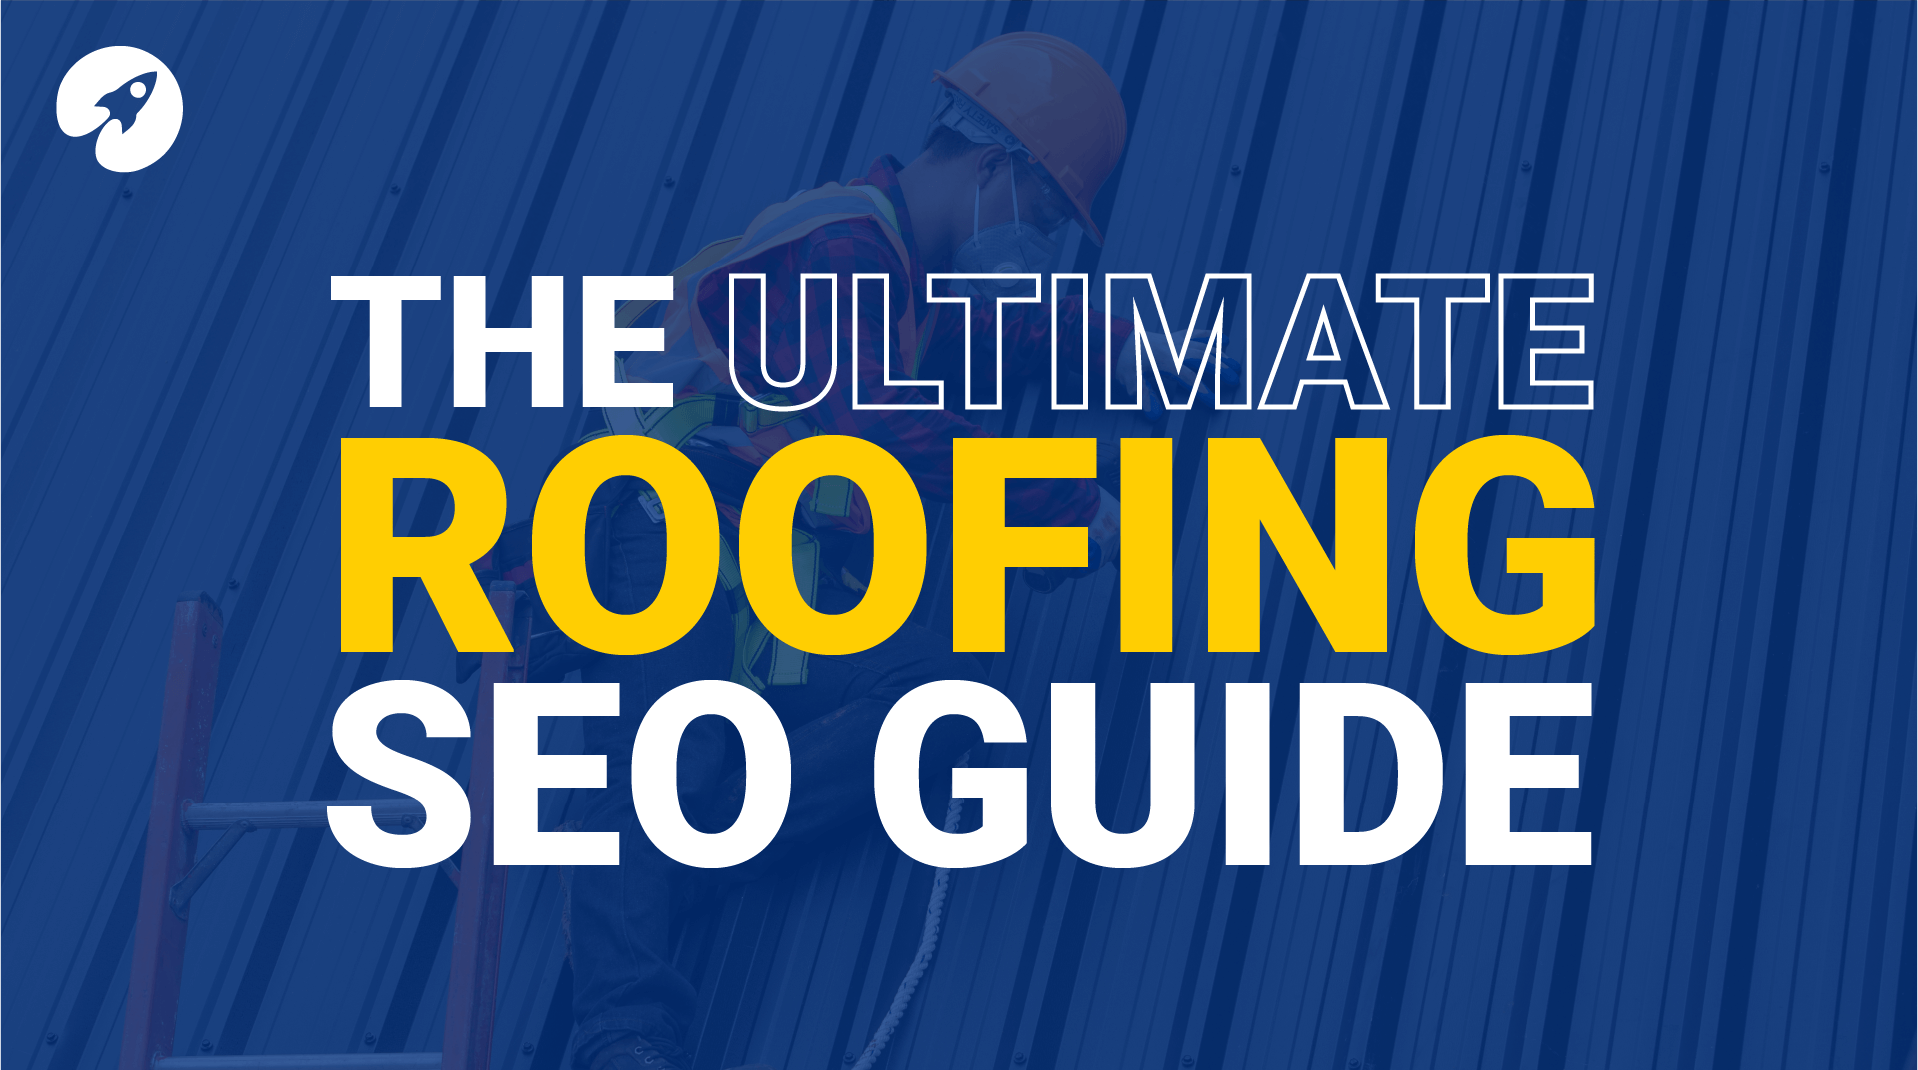 A Comprehensive Guide for Roofing Companies & Contractors